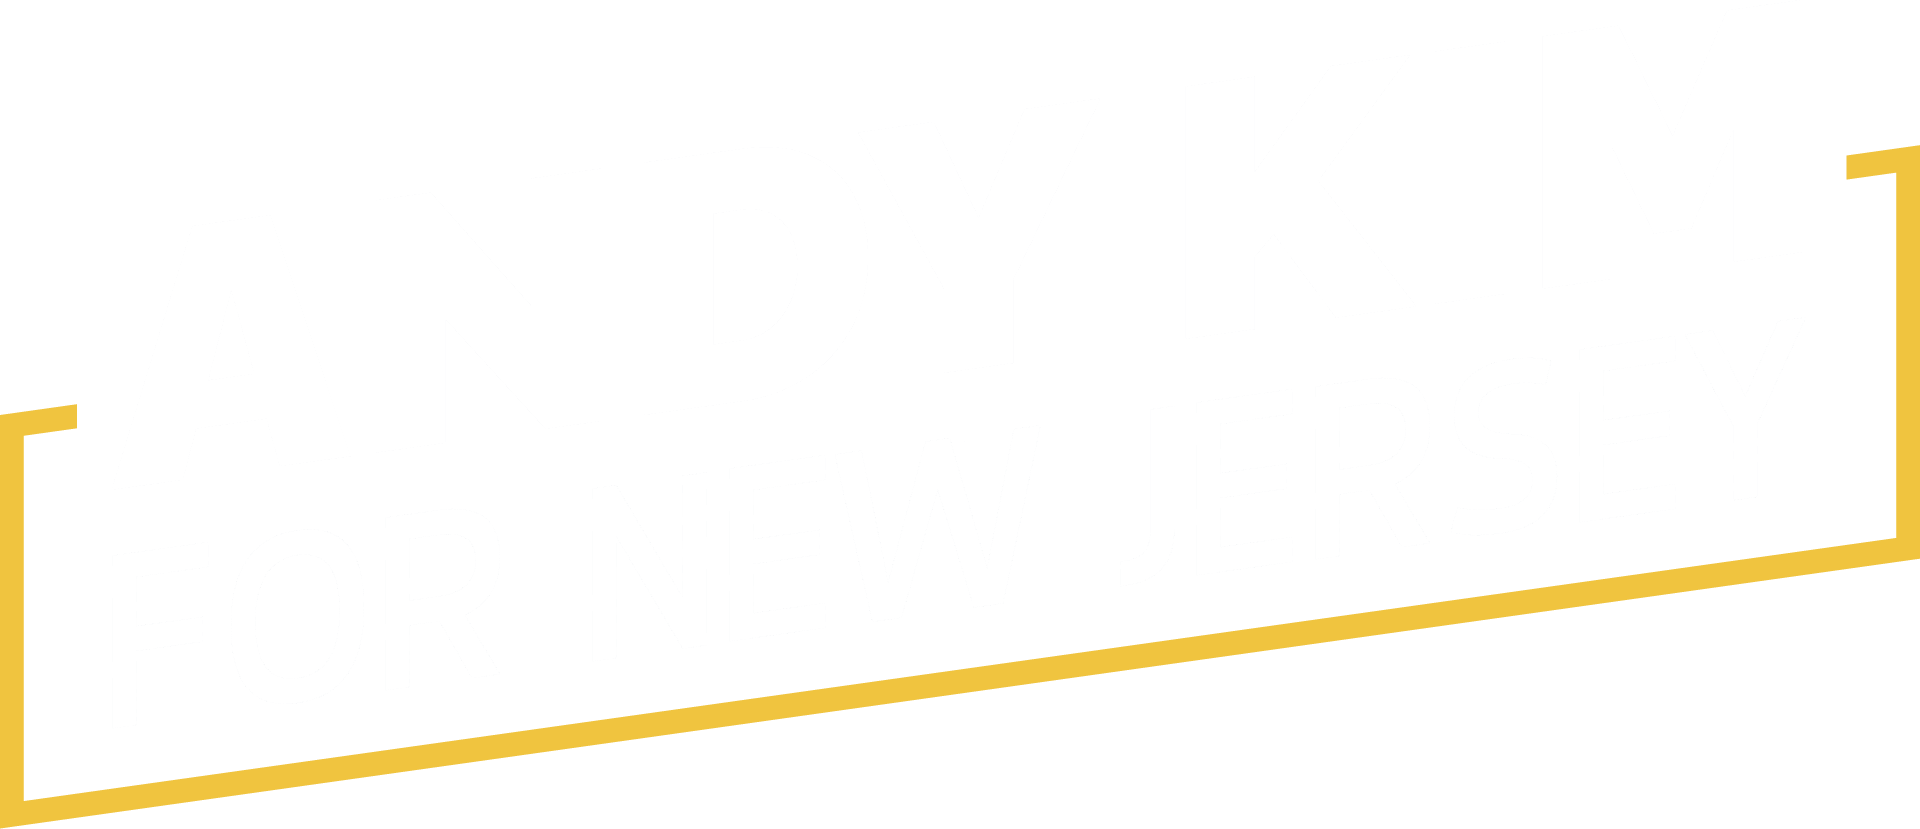 Andy Kim for New Jersey - Restoring Integrity to the US Senate